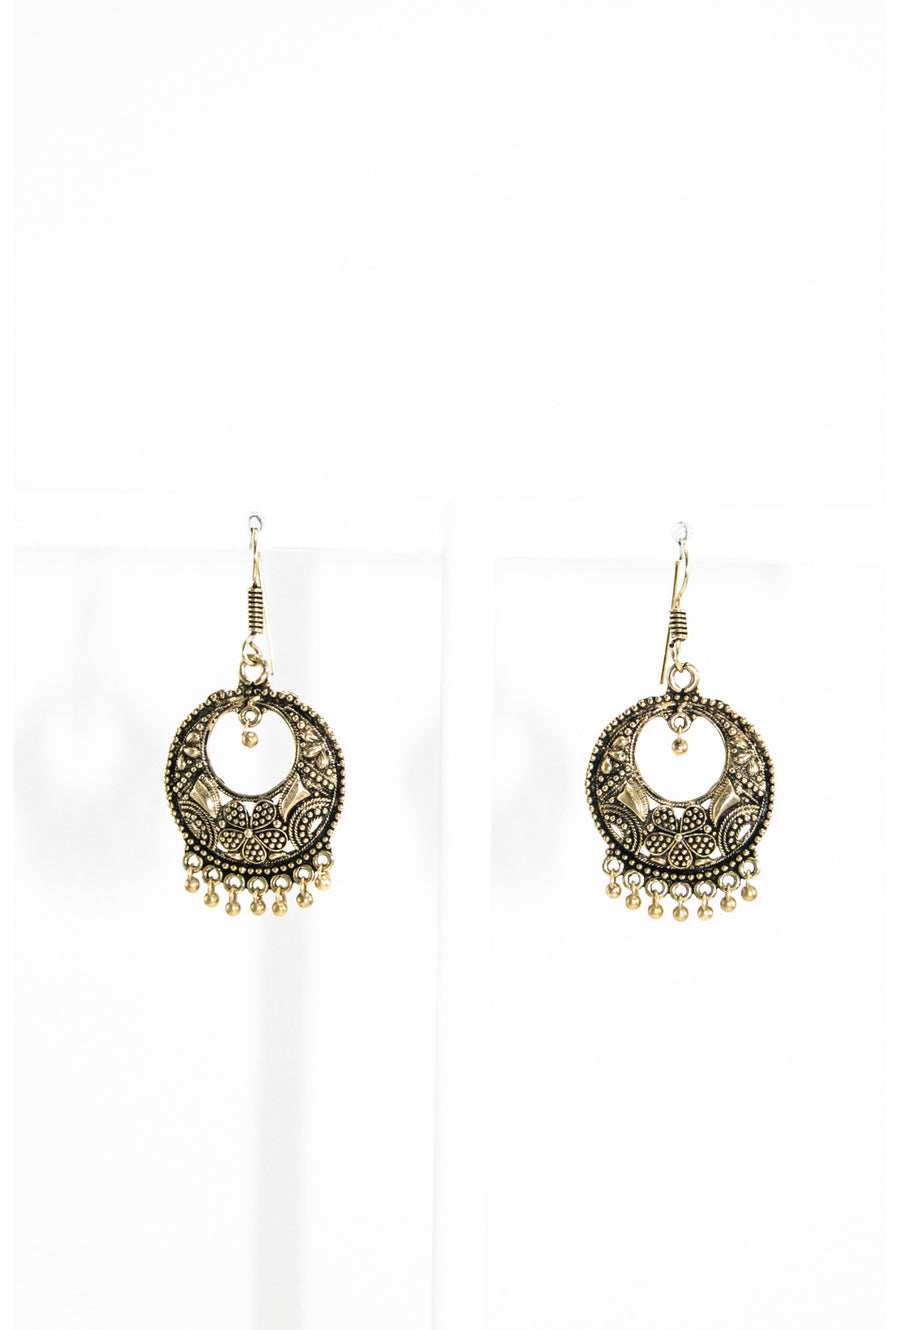 Gold round earrings - Desi Royale